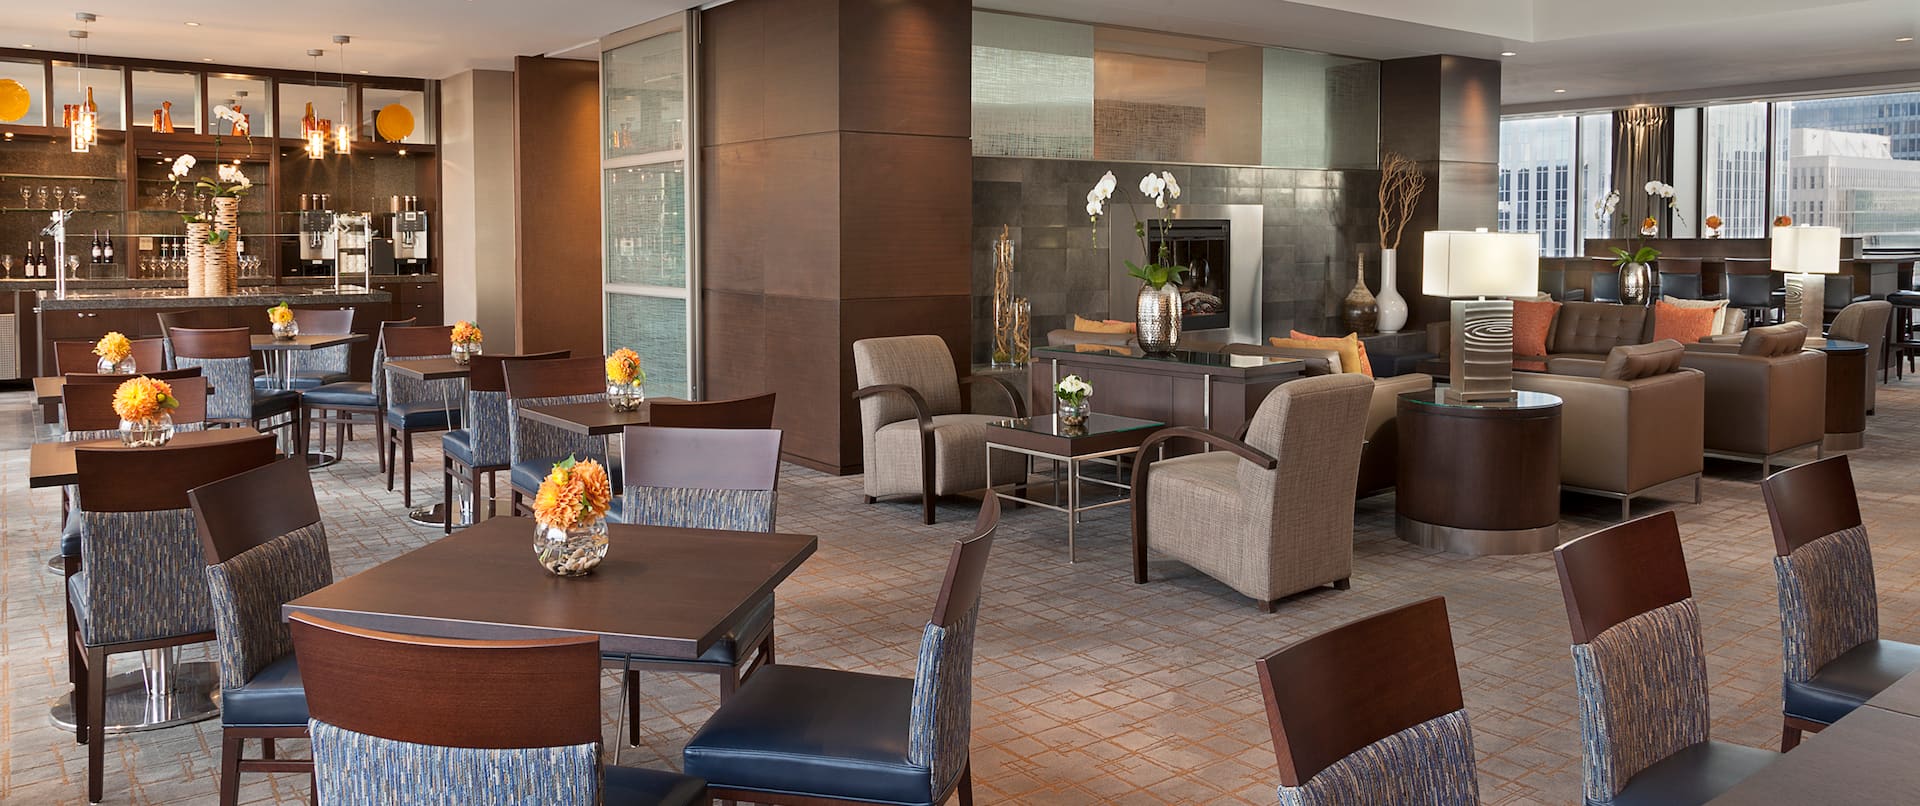 Executive Lounge With Food Station